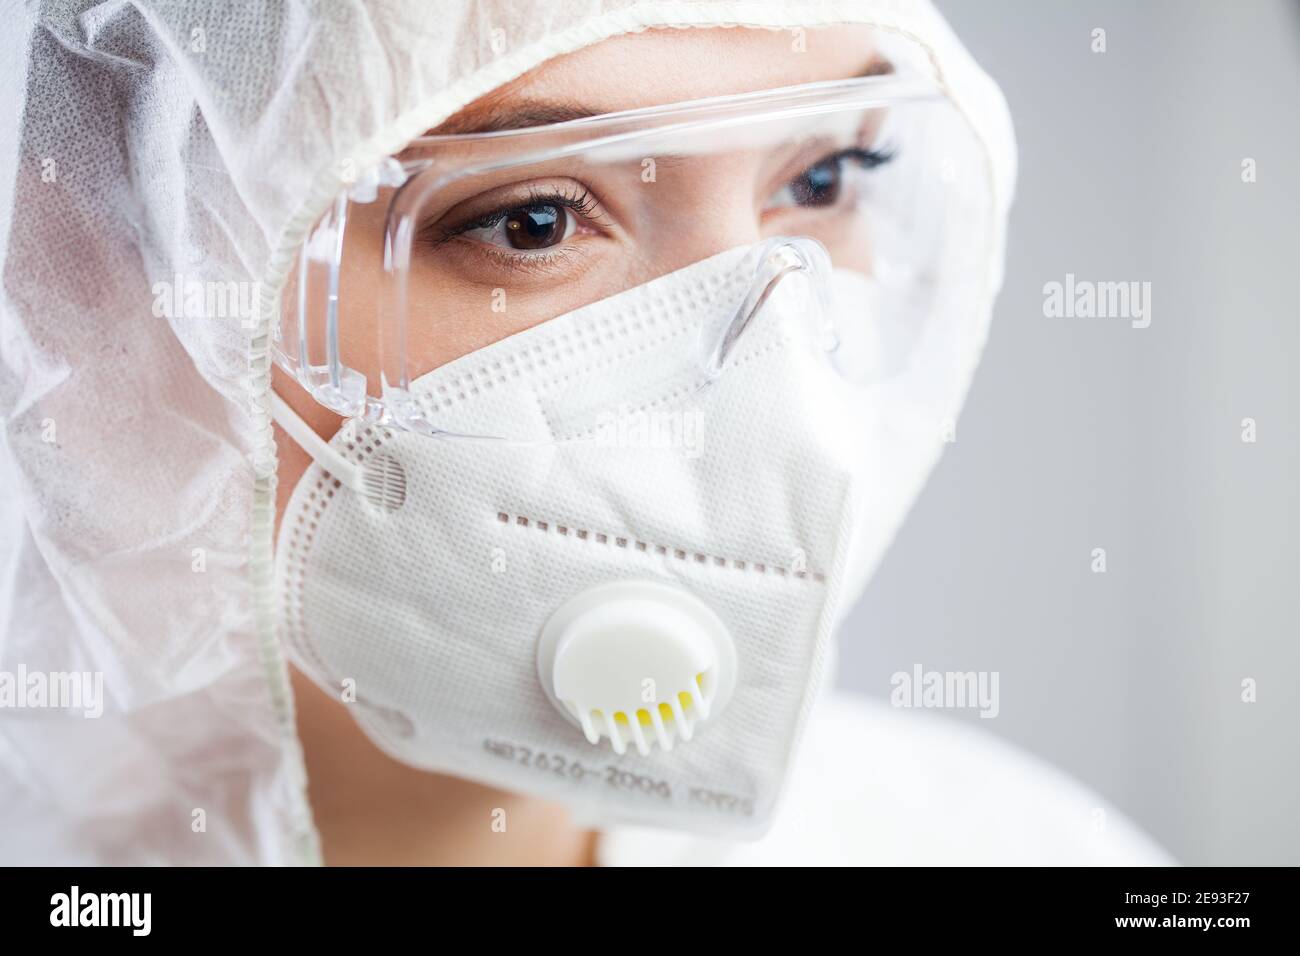 Closeup of tired female doctor,nurse or lab tech wearing PPE protective suit,white face mask and goggles,lost hope due to many patient deaths,looking Stock Photo